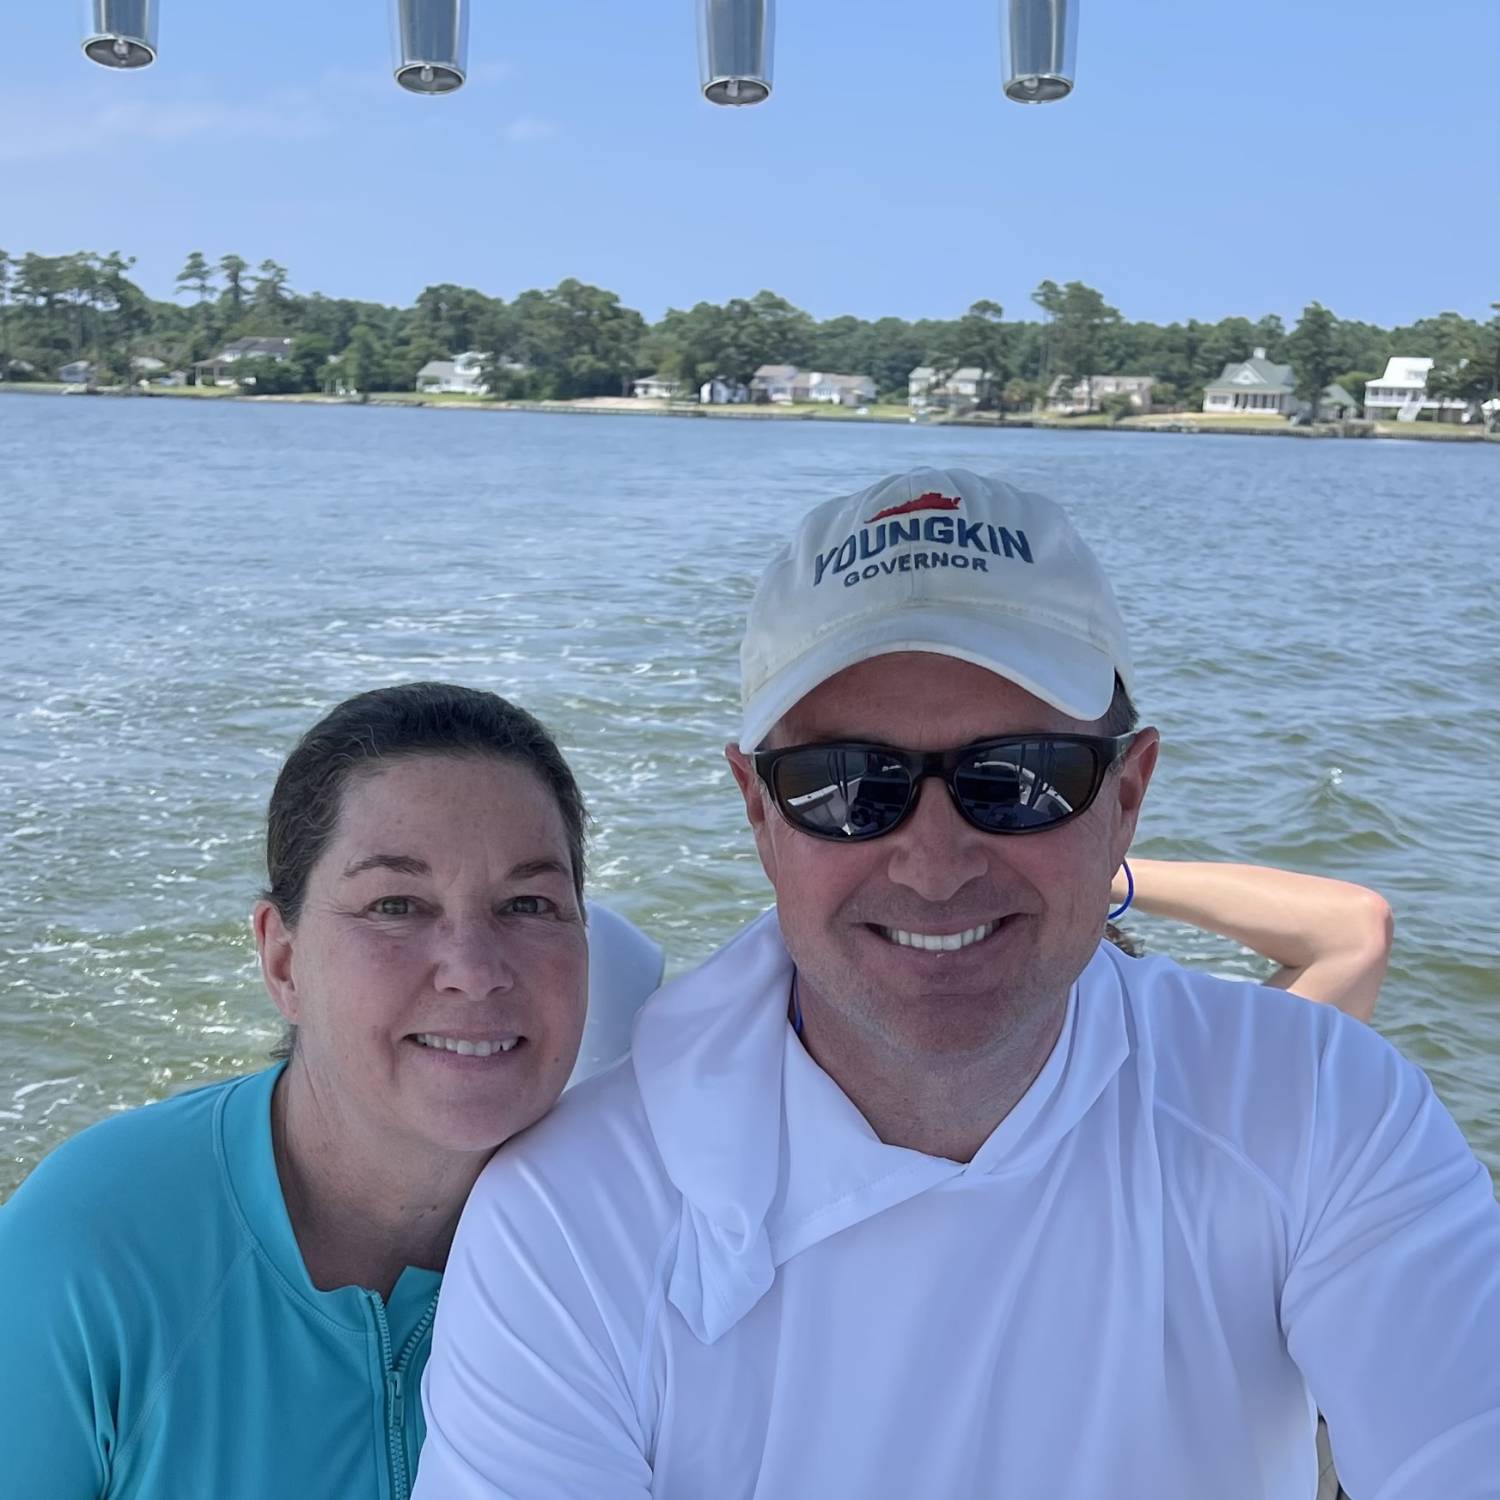 Title: Maiden Voyage - On board their Sportsman Heritage 231 Center Console - Location: Southern Sores, NC. Participating in the Photo Contest #SportsmanAugust2023